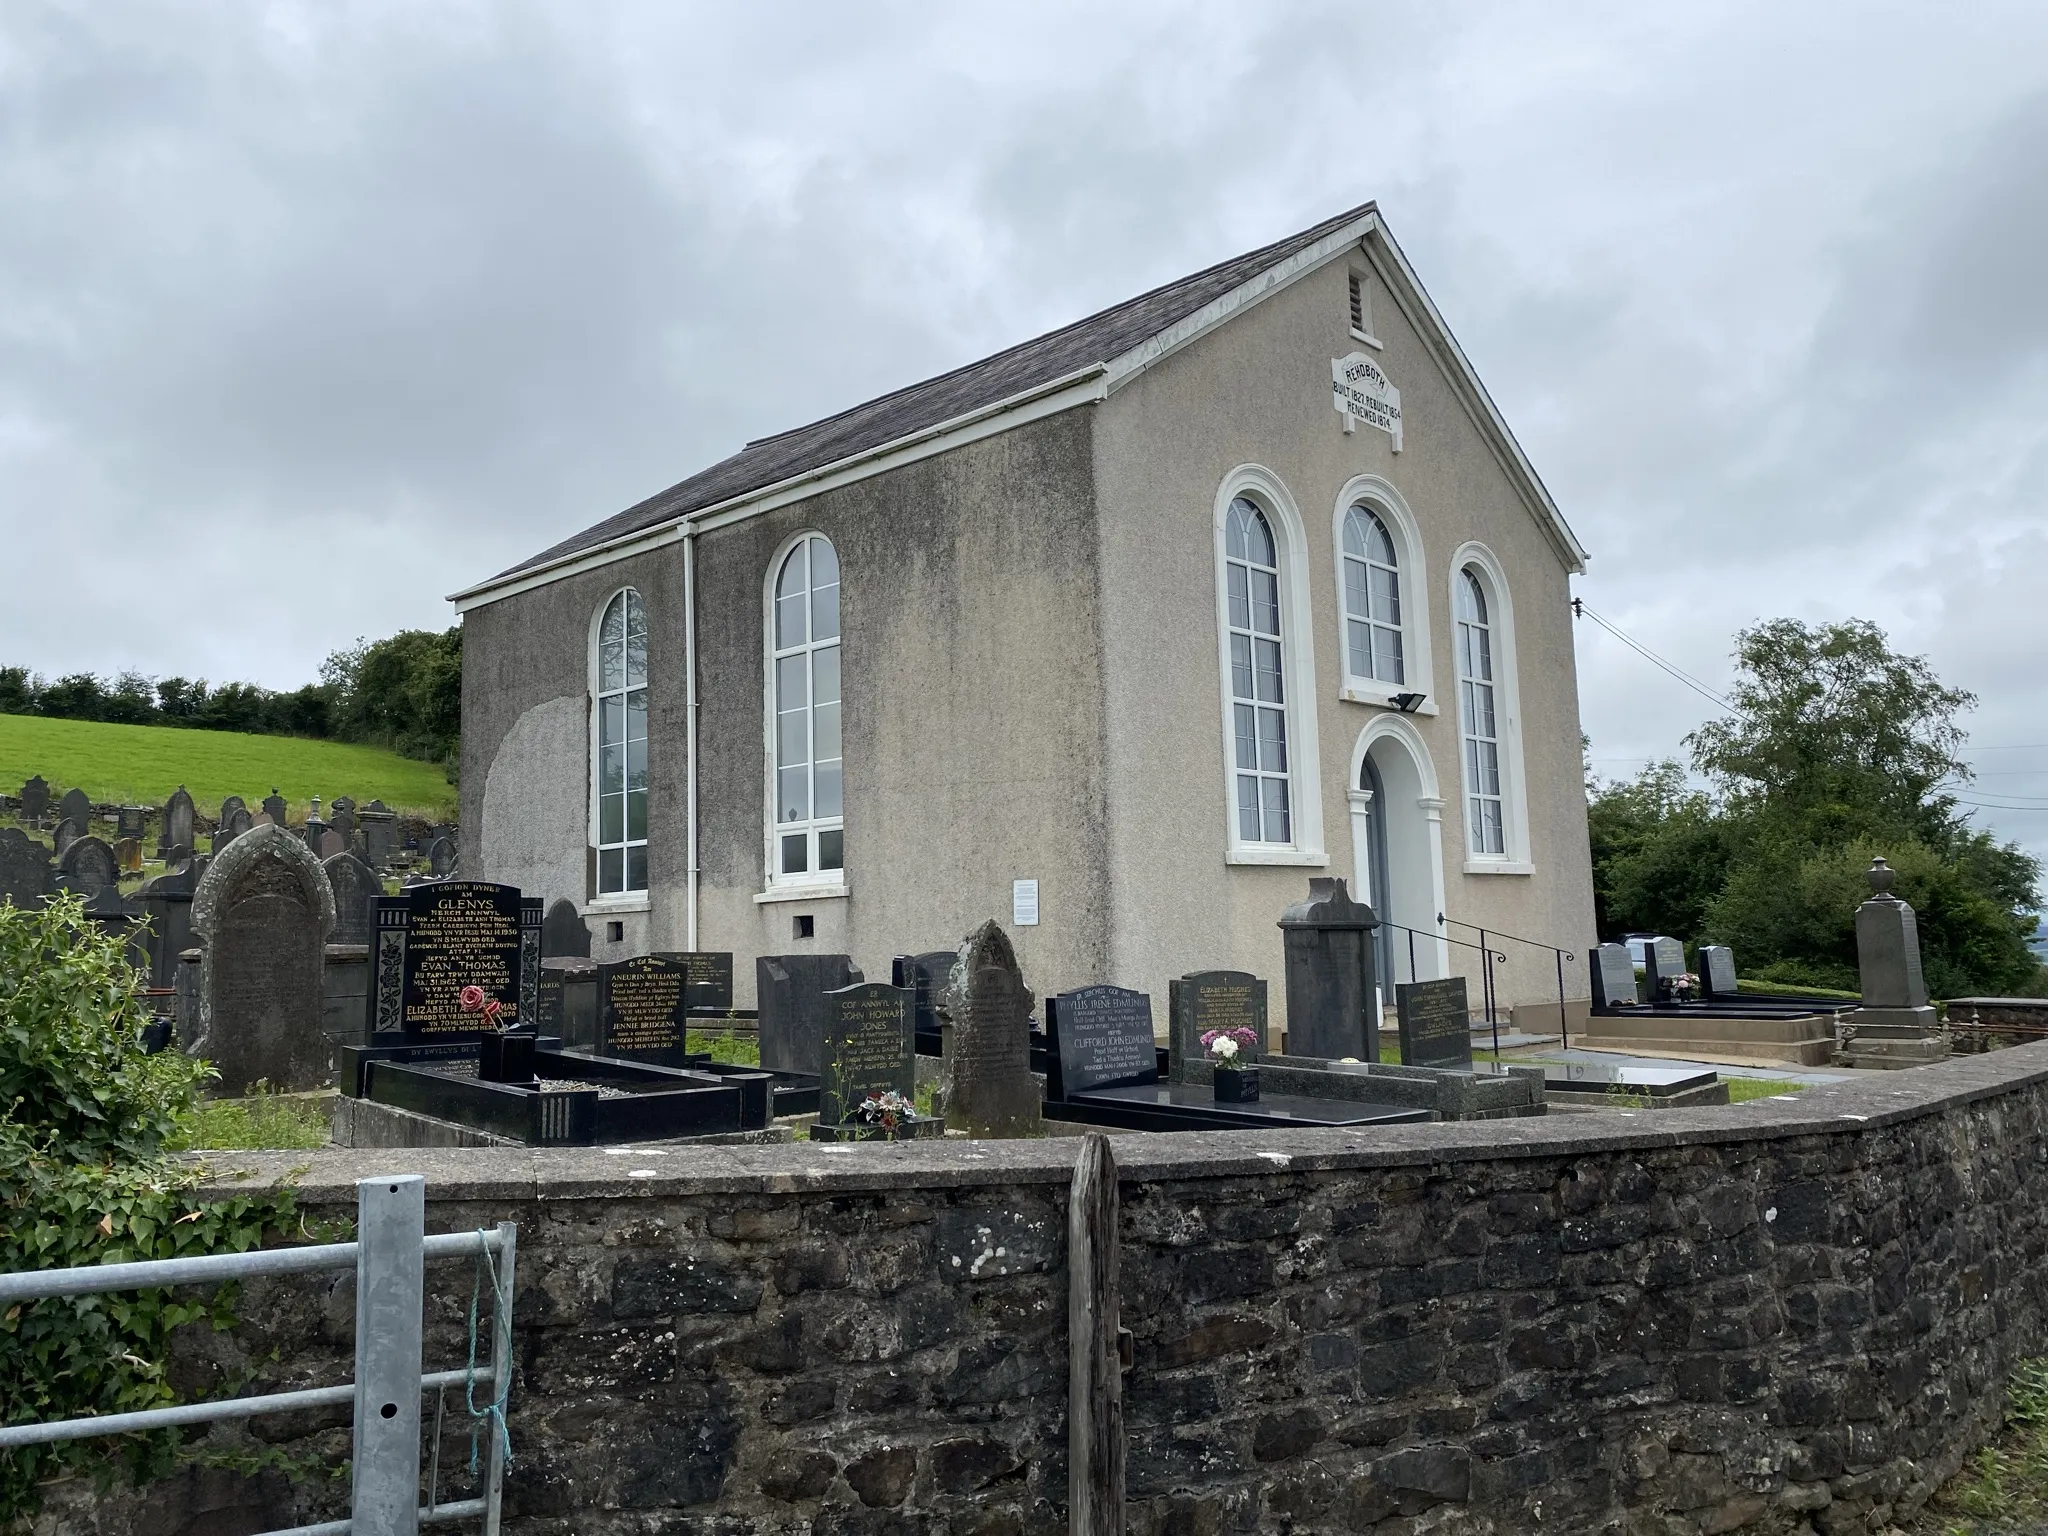 Photo showing: Rehoboth Chapel.
Remote rural chapel near Pen y Mynydd.

Situated about half way between Pen-y-Mynydd and Five Roads on the road which runs between the two villages. According to Coflein (https://coflein.gov.uk/en/site/6617/} the chapel was built in 1819, rebuilt in 1827 and 1855, and further modified in 1875.